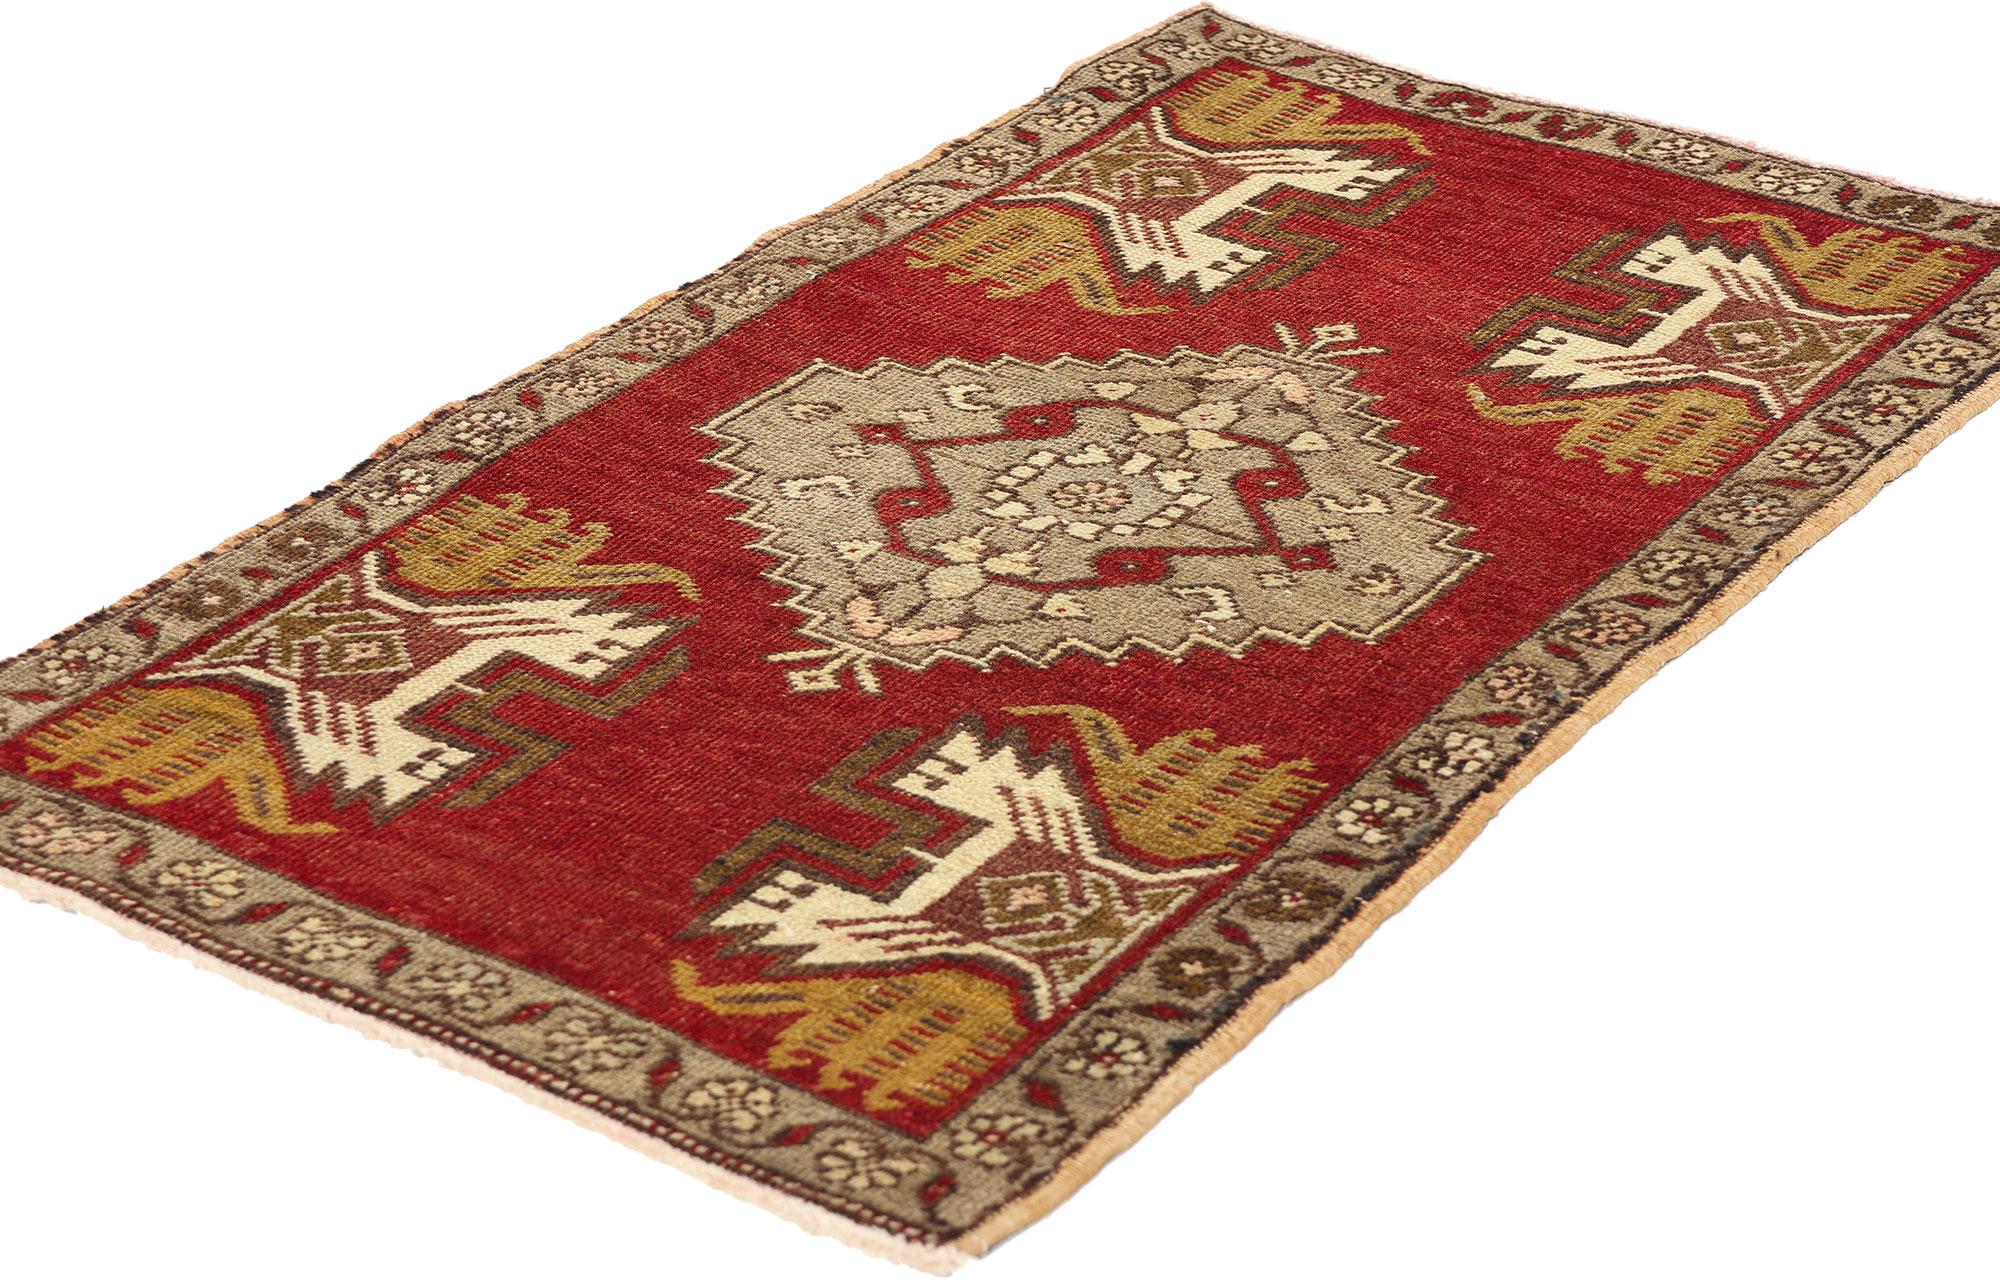 50553 Vintage Turkish Yastik Rug, 01'08 x 02'10. Vintage Turkish Yastik rugs are the creme de la creme of small Anatolian rugs. Originally used as pillow covers, these beauties have a history as rich as their intricate designs. Yastik rug patterns